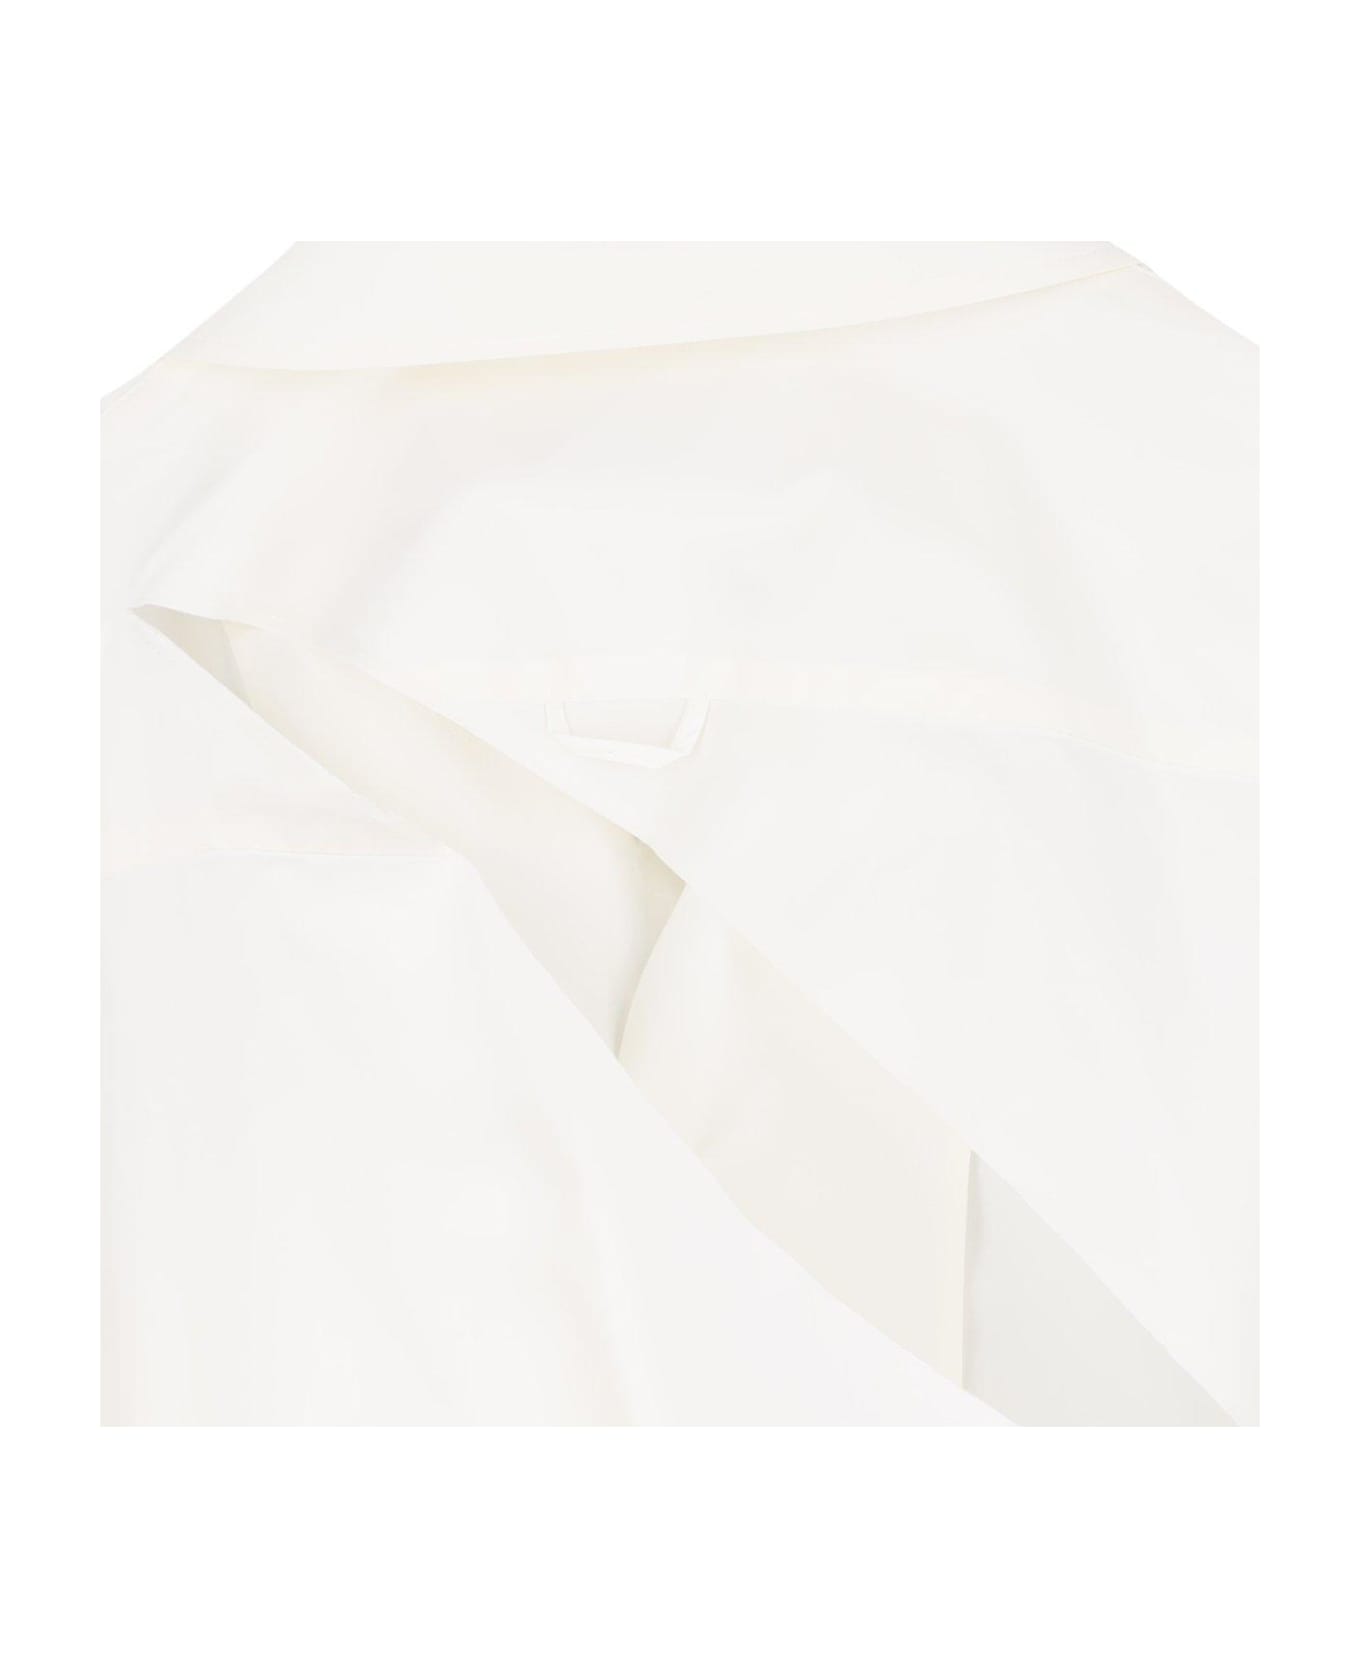 MM6 Maison Margiela Cut Out Detailed Buttoned Shirt - OFF WHITE (White)